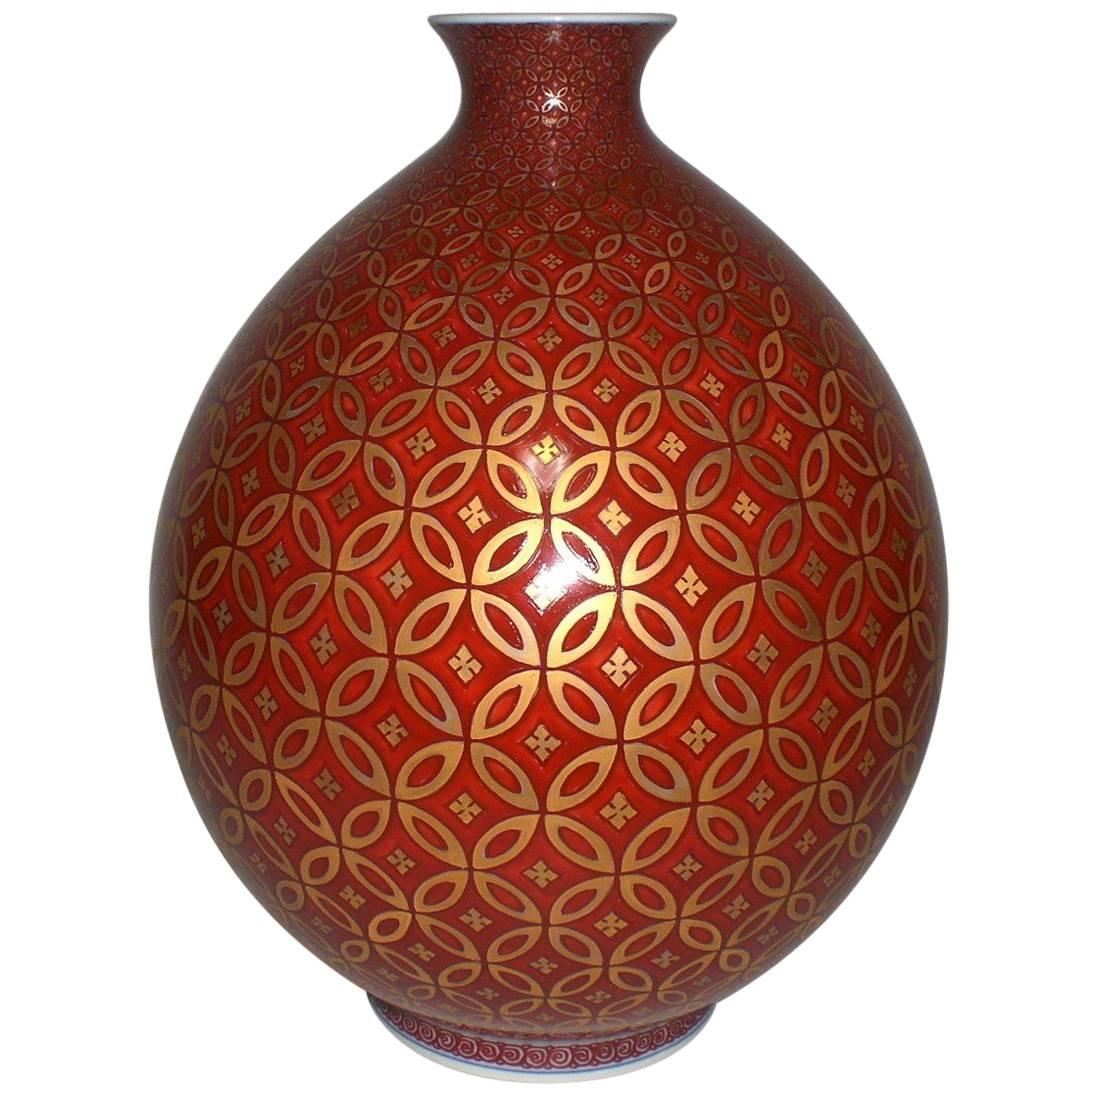 Japanese Contemporary Red Gold Porcelain Vase by Master Artist